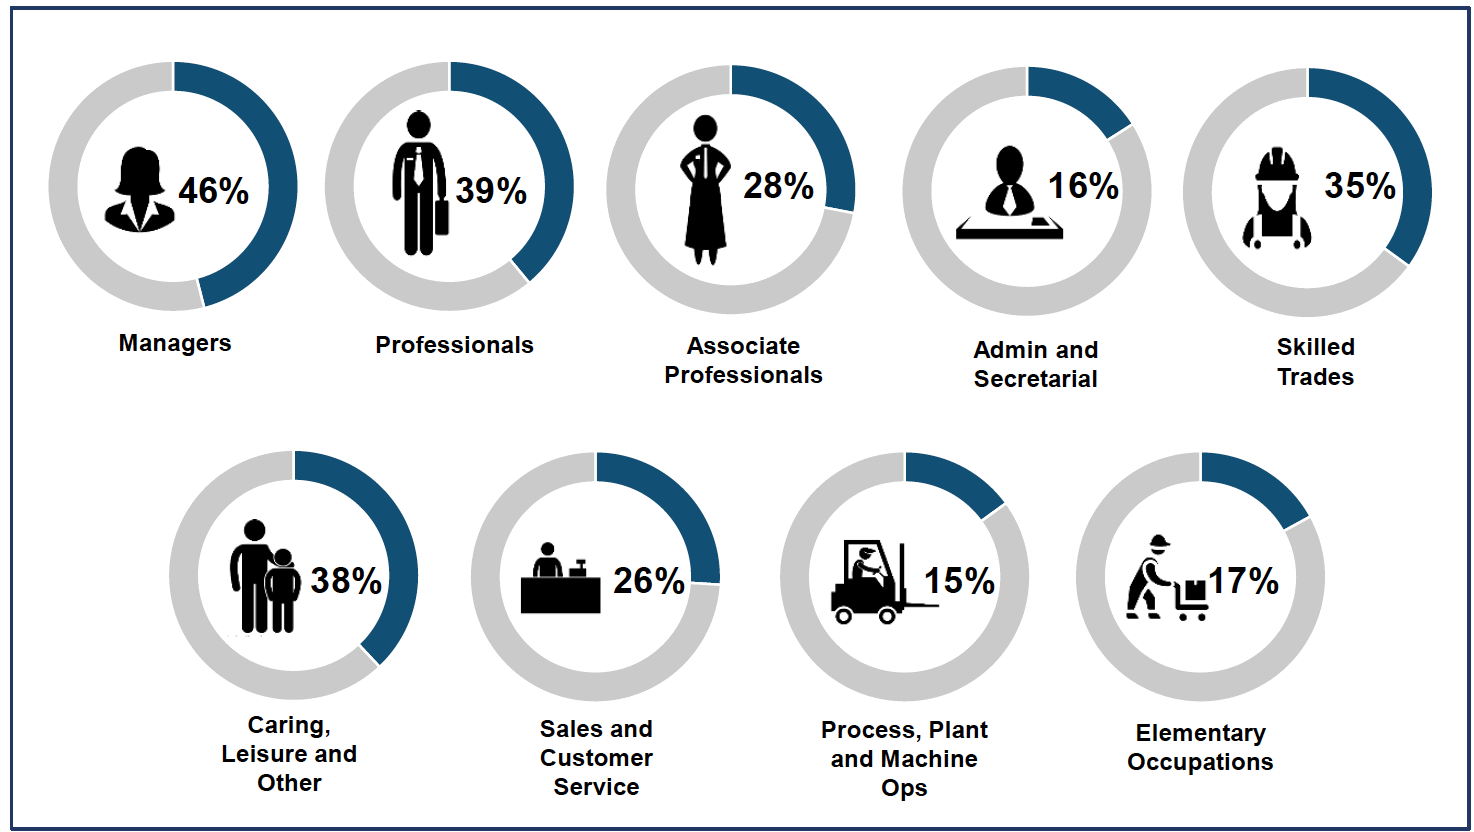 Image showing the occupations most affected by the need for upskilling.